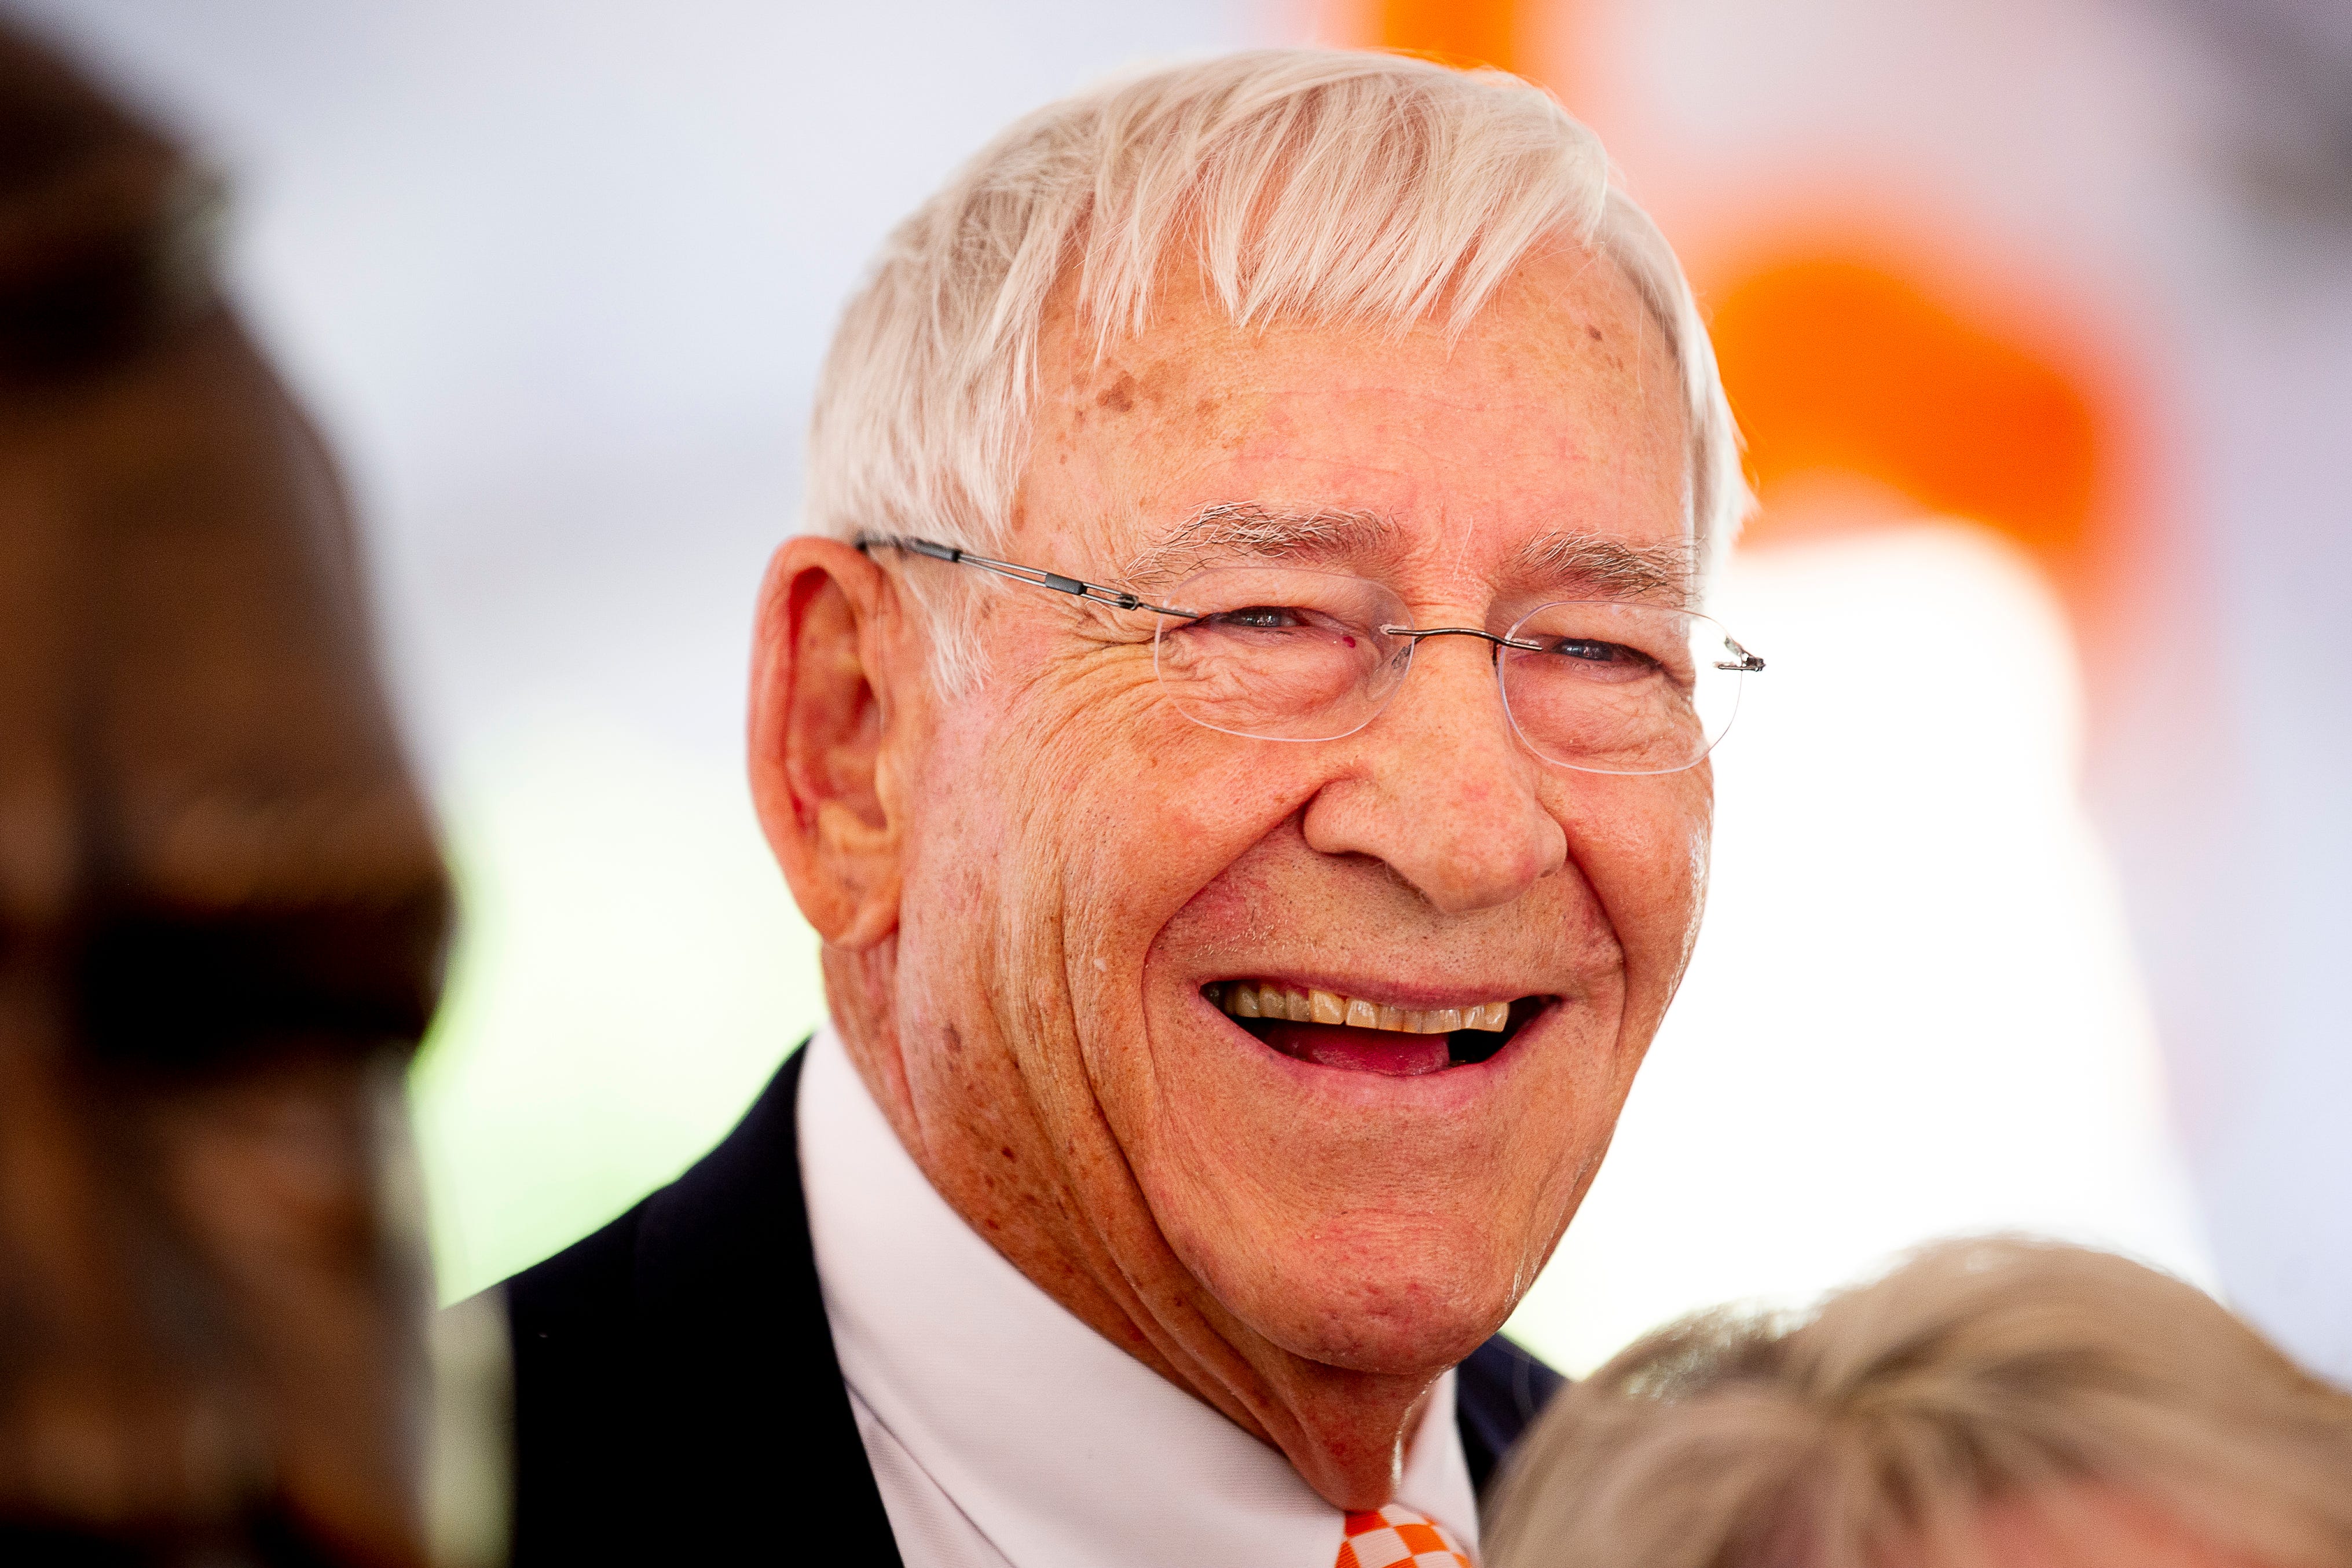 Former Tennessee coach and athletic director Doug Dickey smiles during a dedication ceremony of the Doug Dickey Hall of Fame Plaza at the Neyland-Thompson Sports Complex in Knoxville, Tennessee on Friday, October 4, 2019. Dickey led UT to its second SEC title in 1969 and served as the Vols' Director of Athletics from 1986 to 2003.